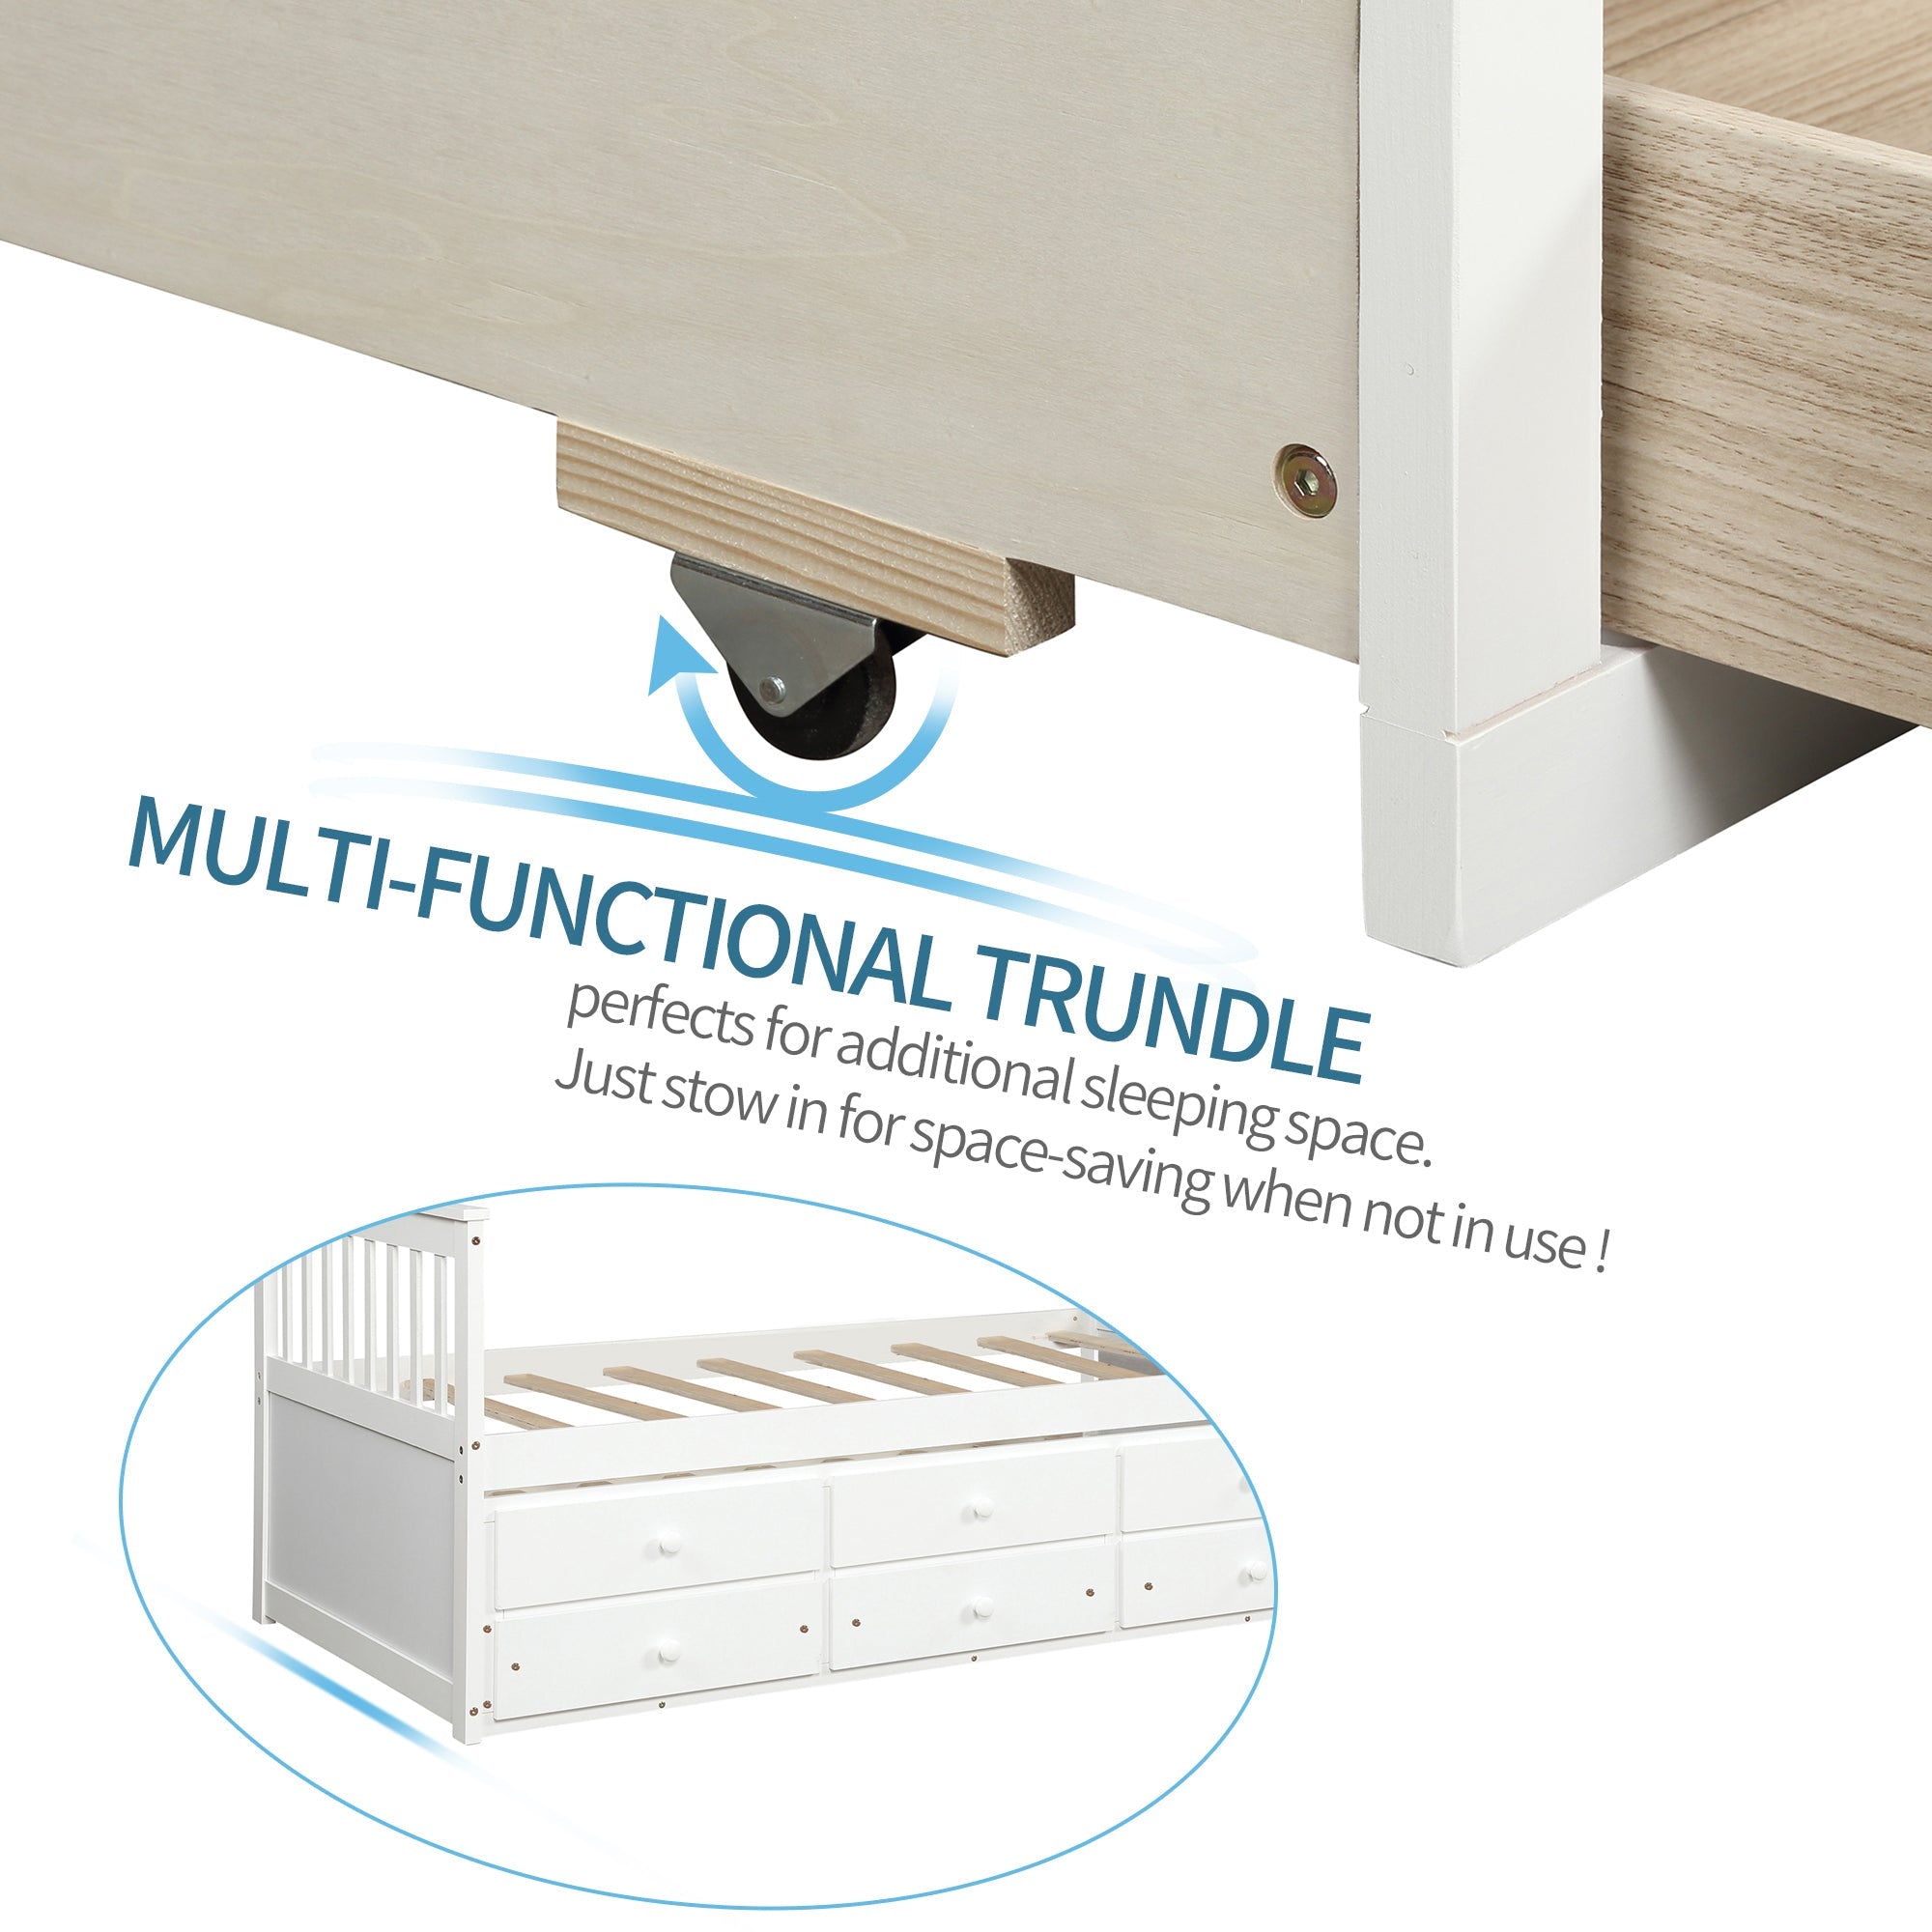 TOPMAX Captain's Bed Twin Daybed with Trundle and Storage Drawers | White Finish | Space-Saving Solution